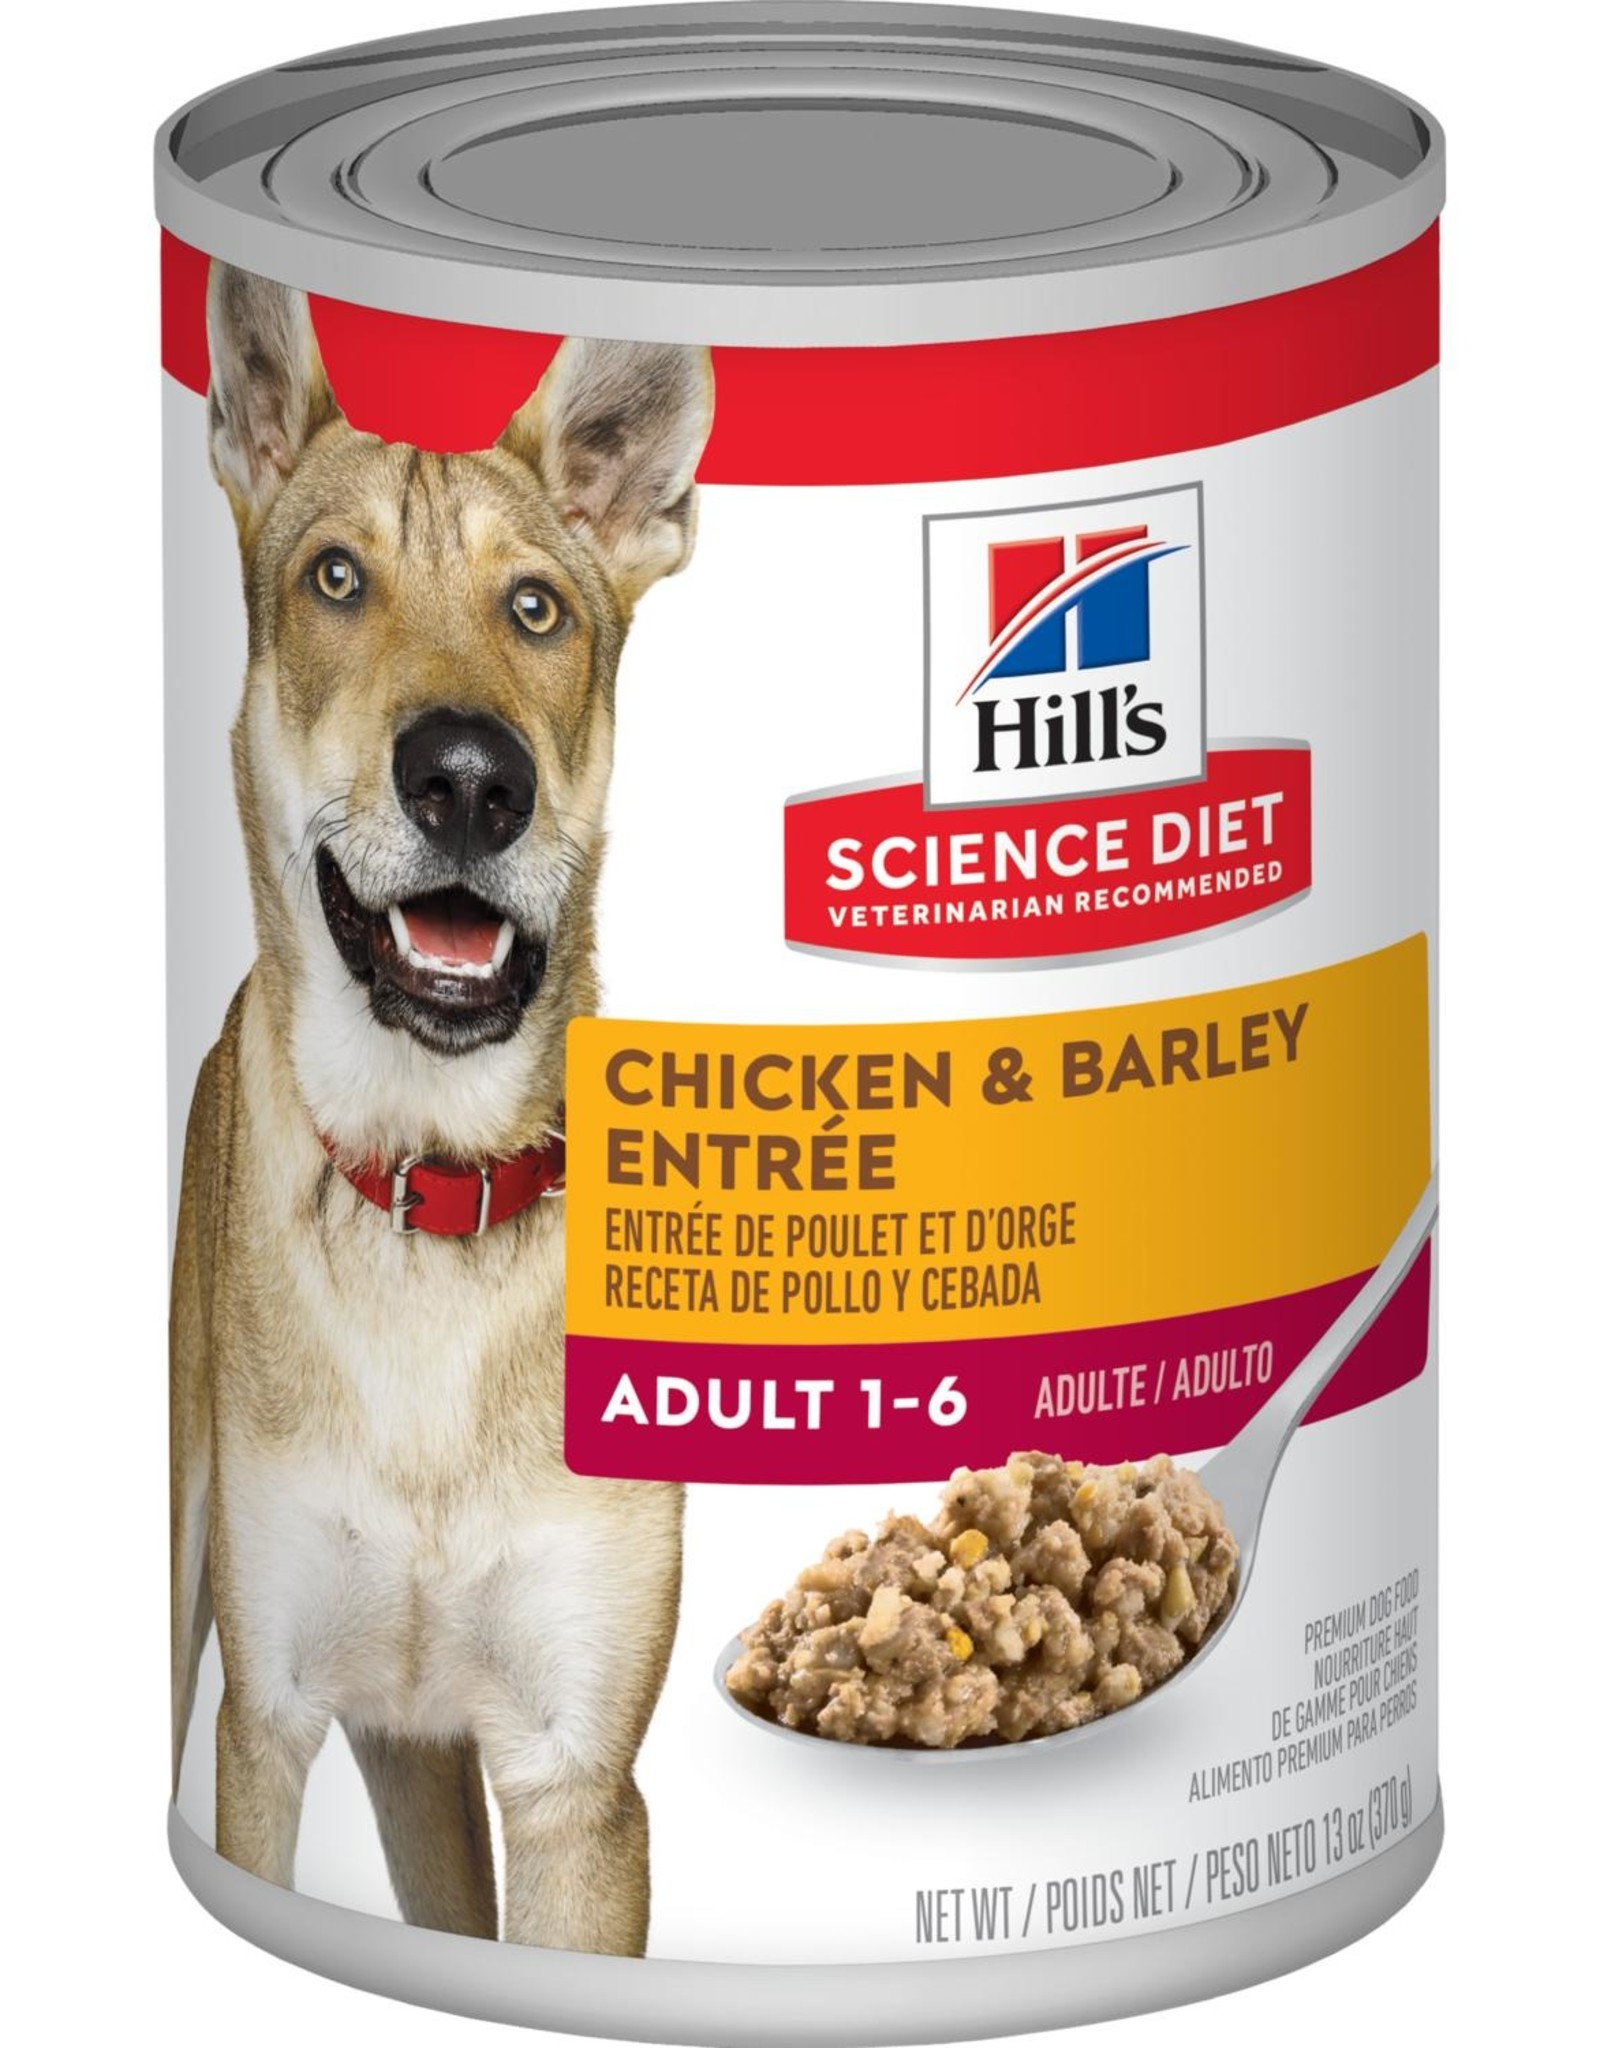 SCIENCE DIET HILL'S SCIENCE DIET DOG ADULT CHICKEN & BARLEY CAN 13OZ CASE OF 12